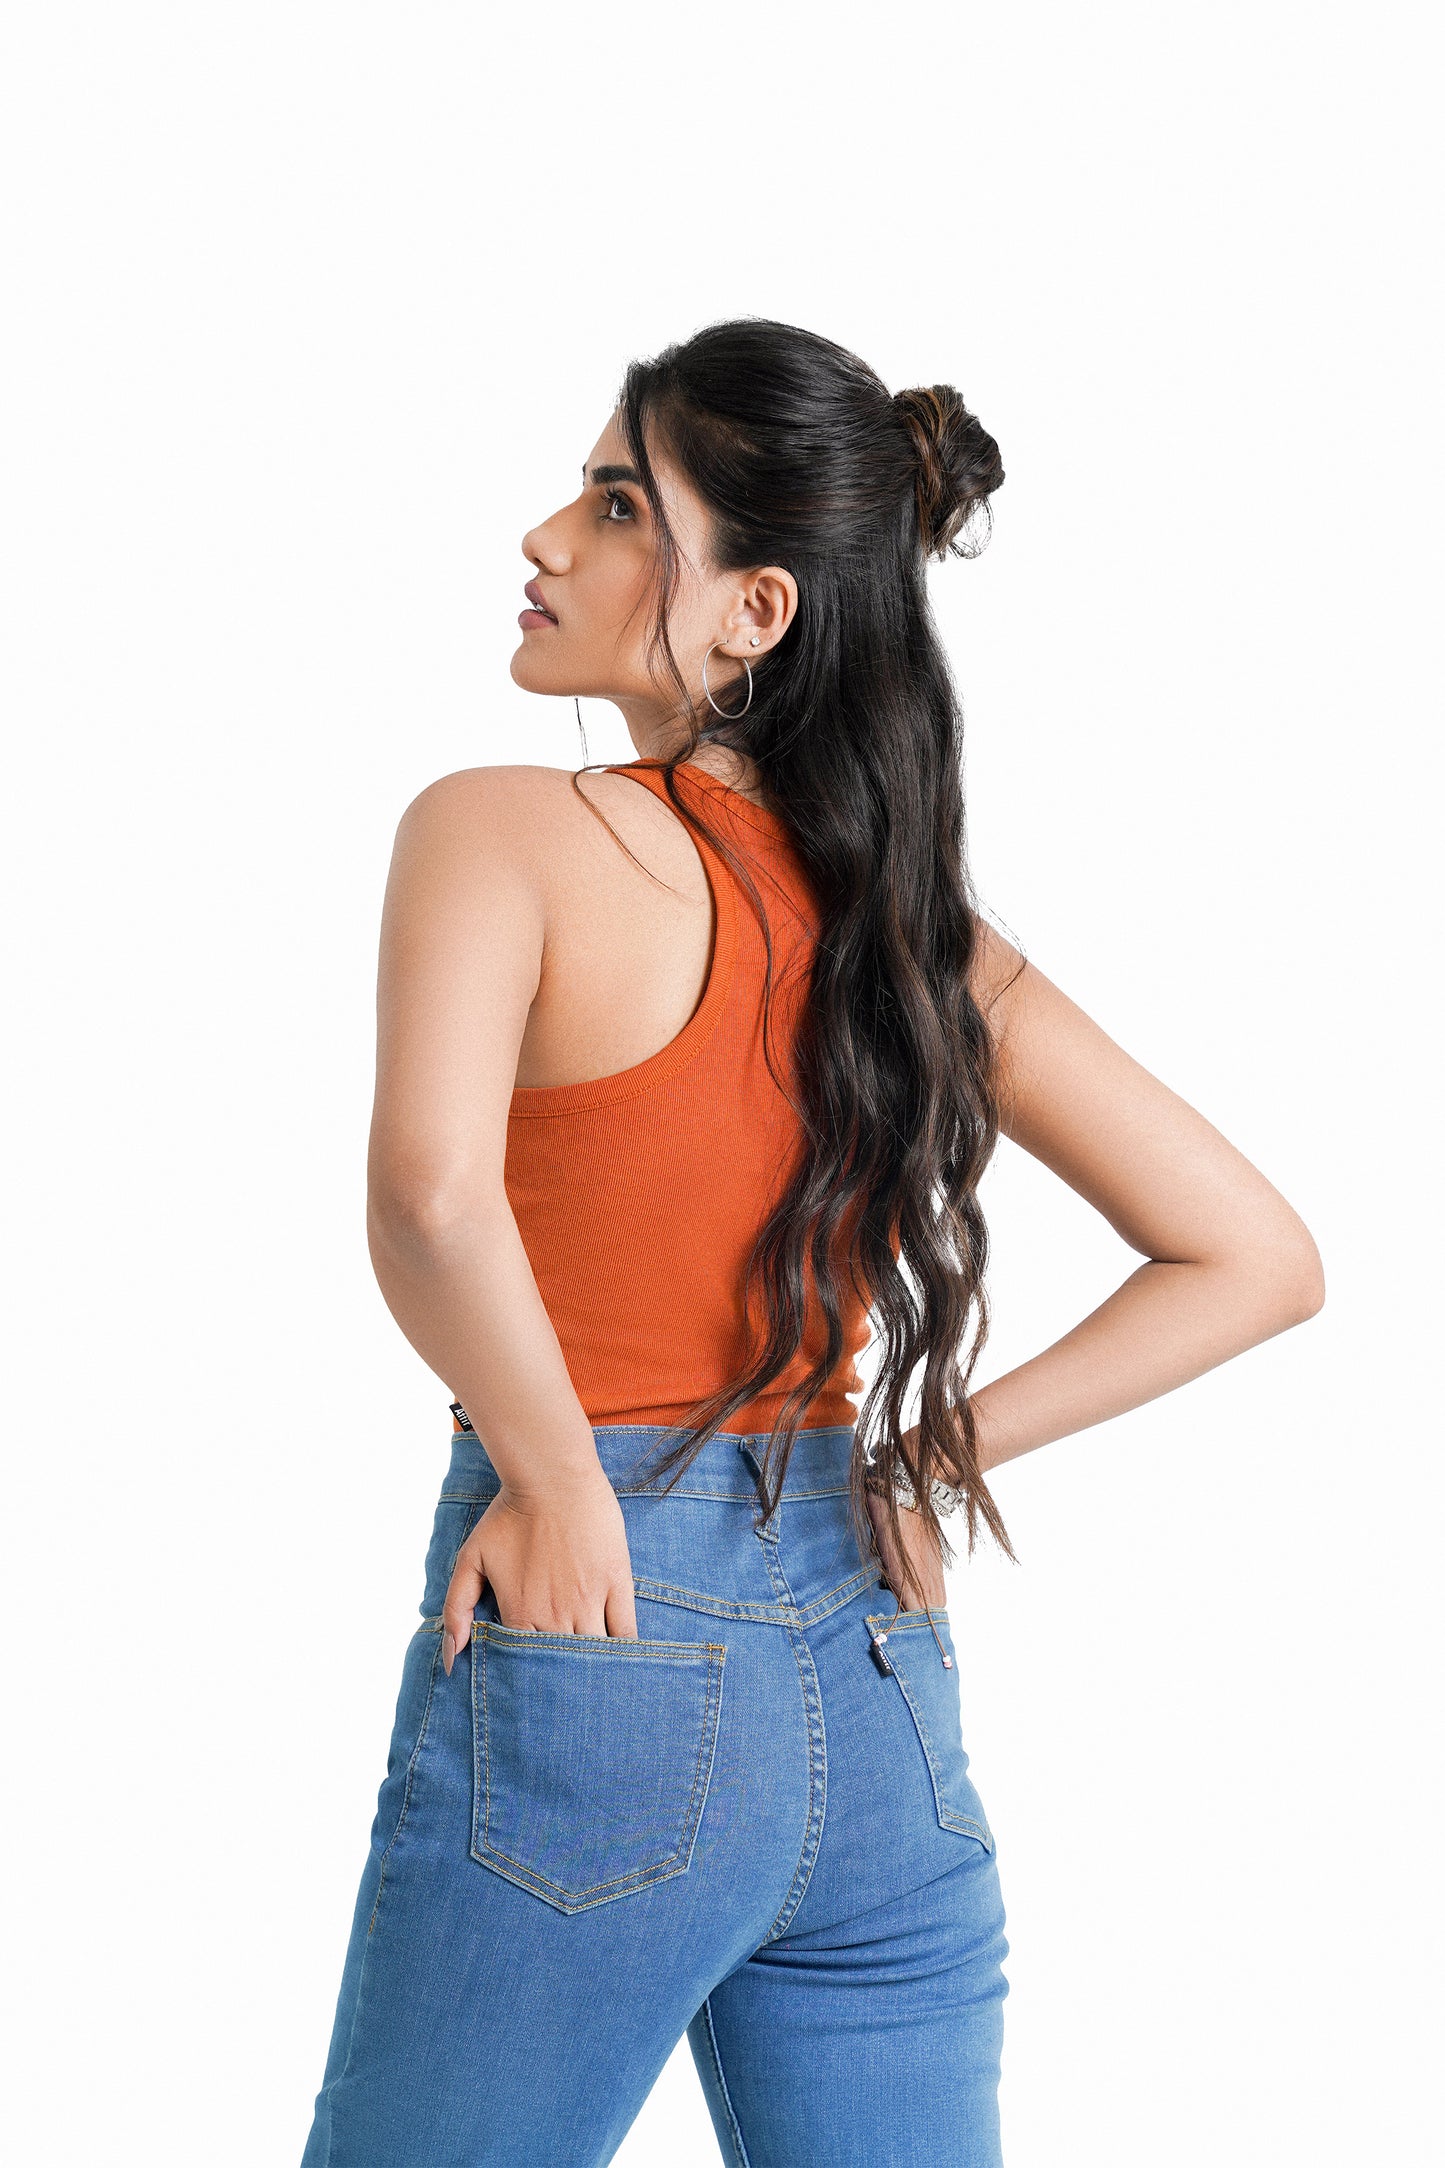 High-Waist Mom Jeans in Light-Wash